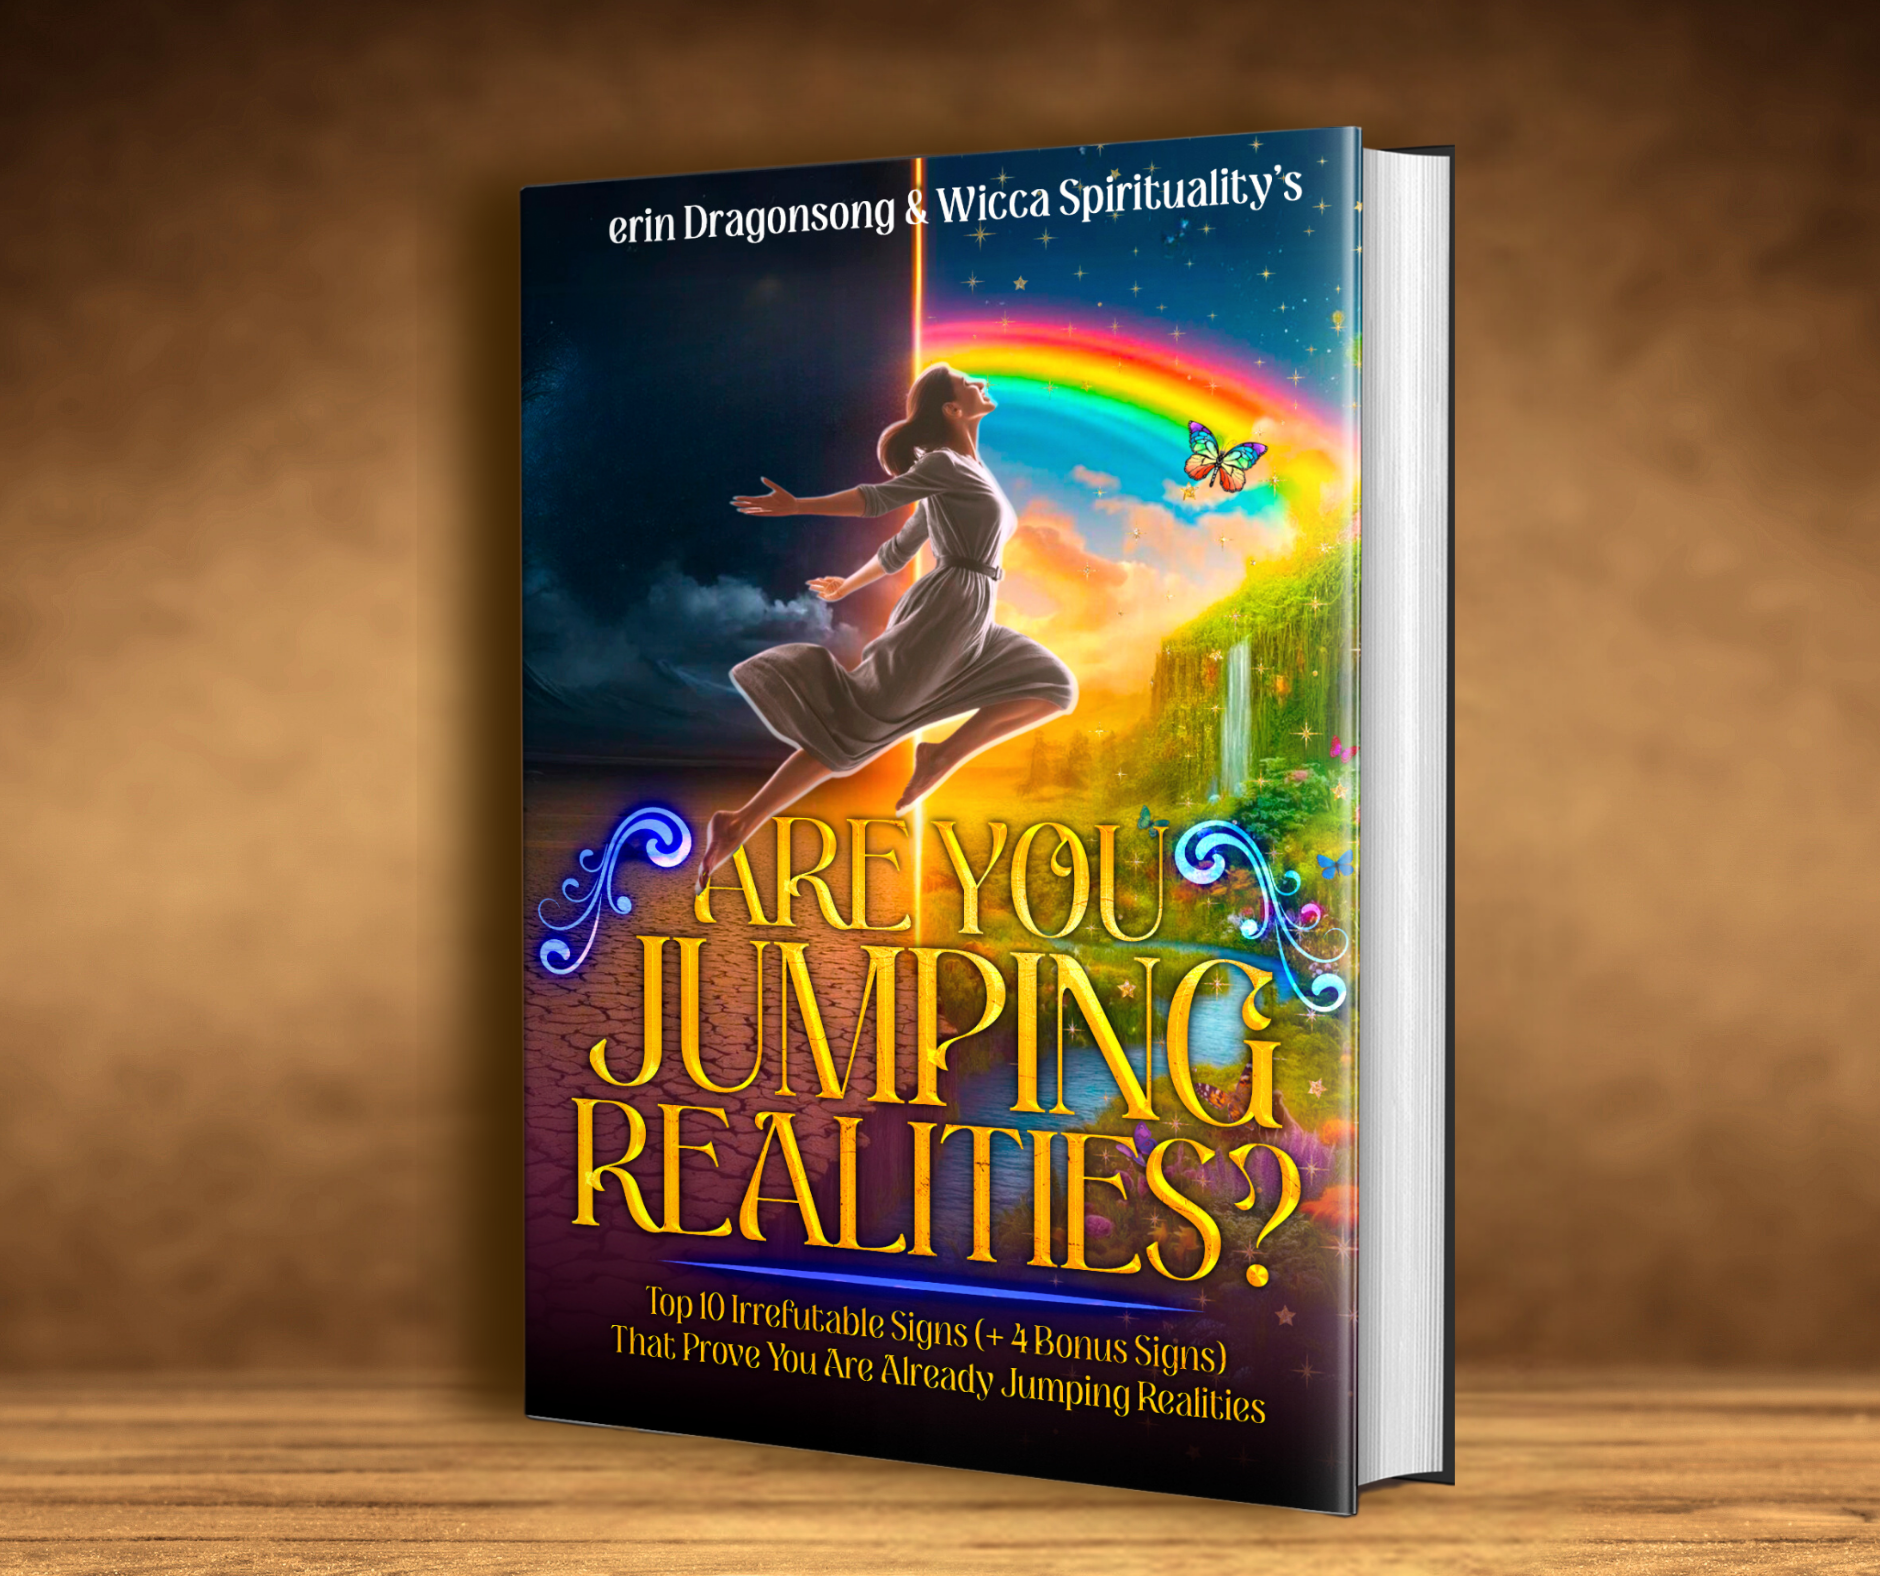 Top 10 Signs You're Jumping Realities (free ebook by renowned magick teacher erin Dragonsong